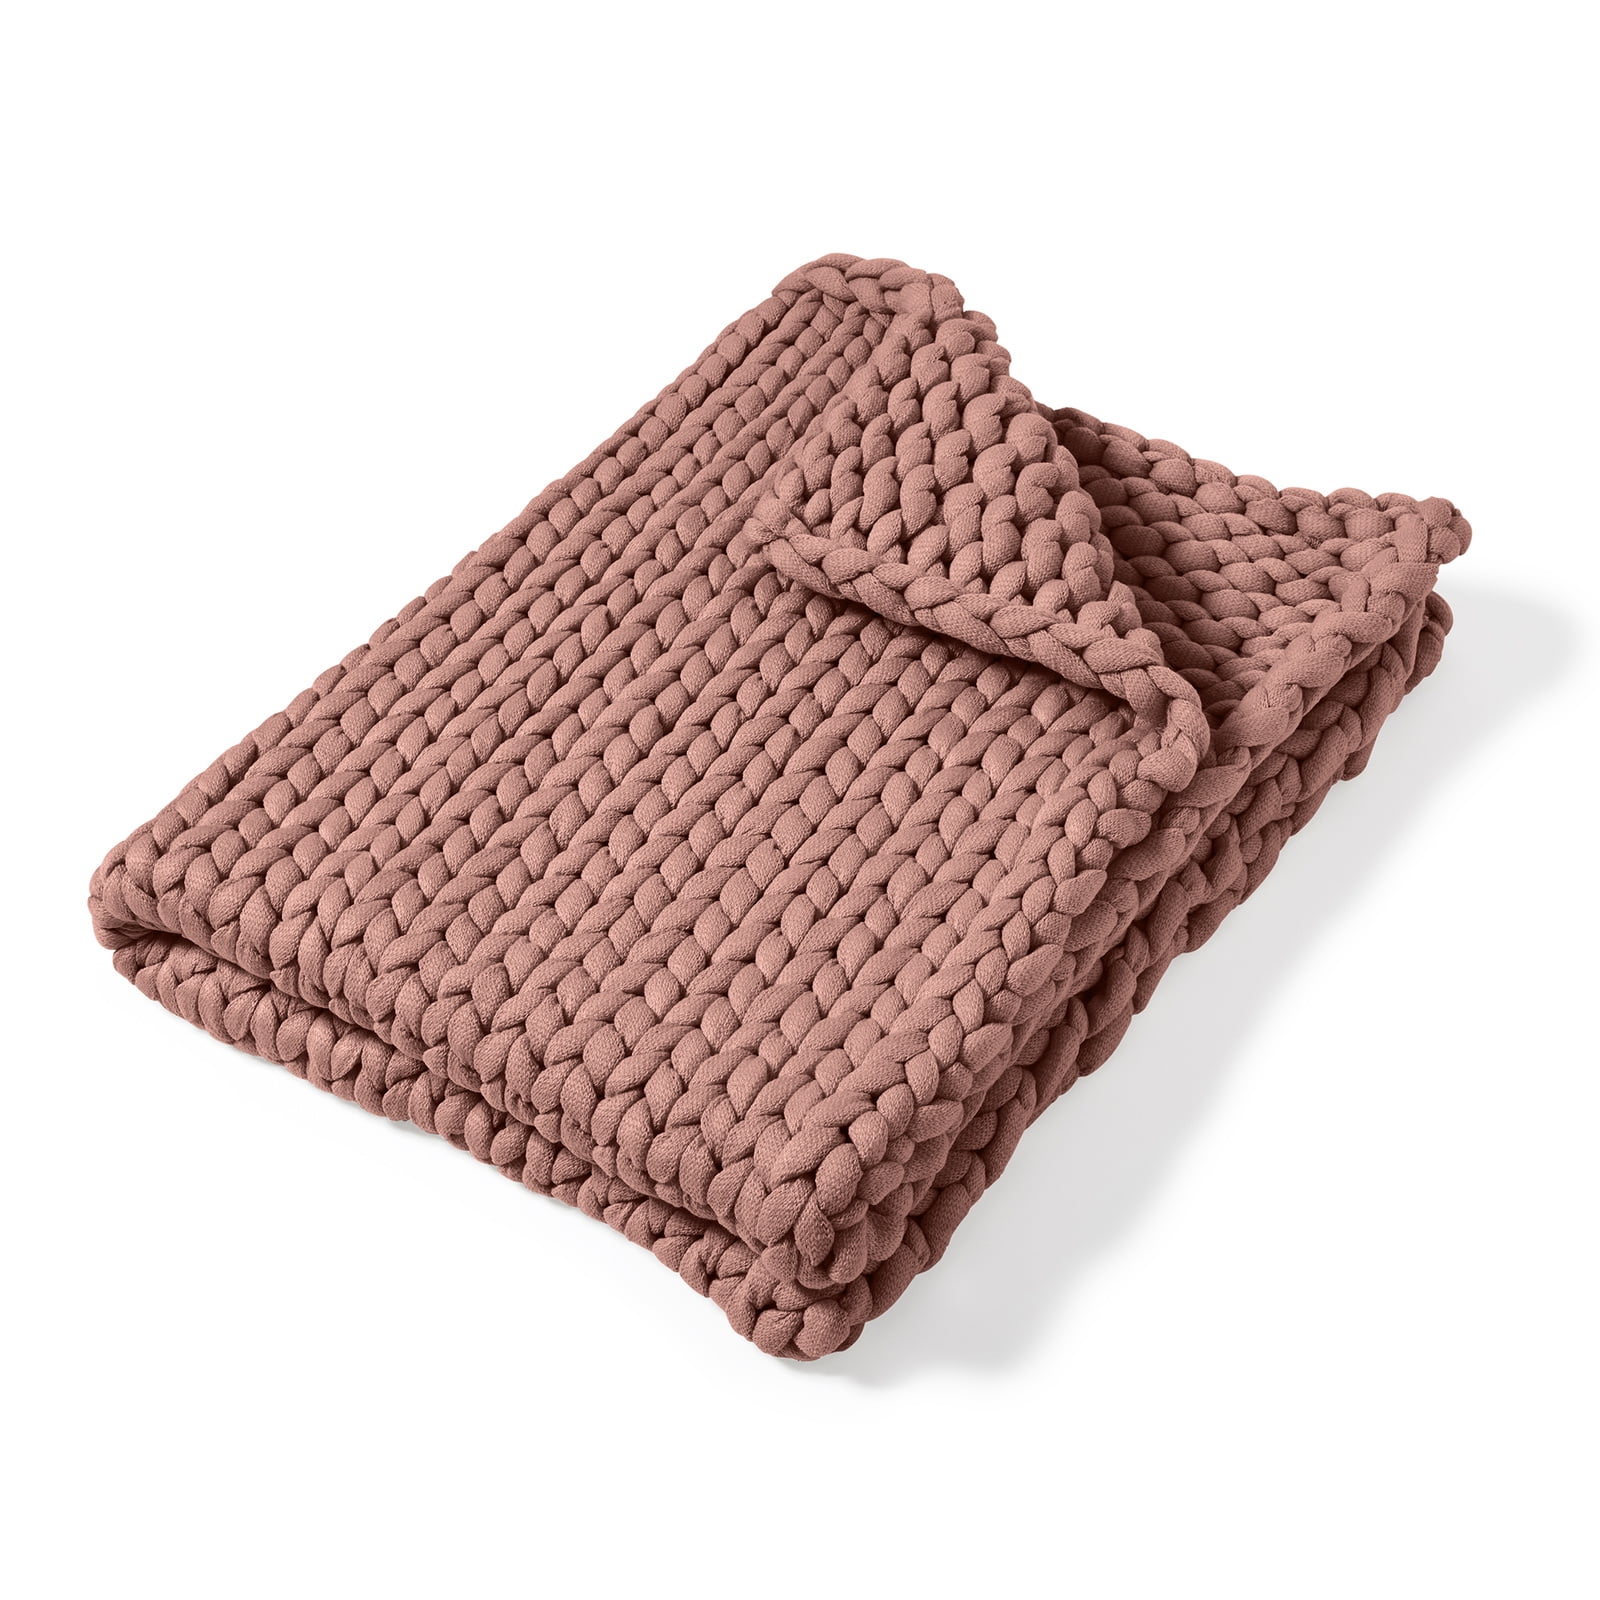 70012 40 X 50 In. Chunky Knit Throw, Mauve